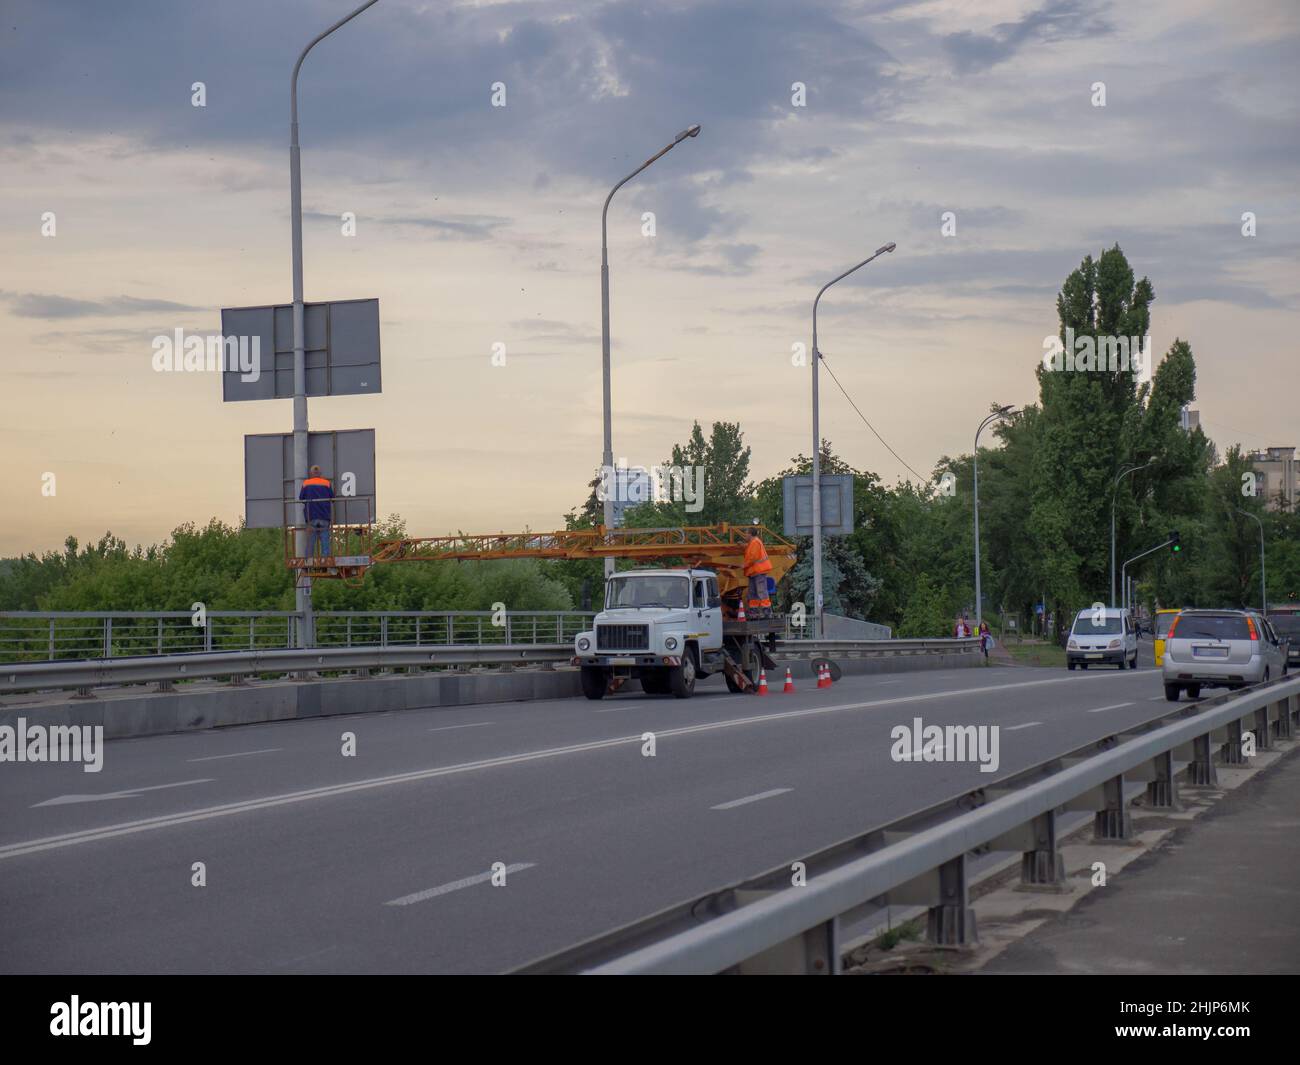 Truck-mounted elevating work platform with two workers doing their job on a road bridge in Kyiv capital city in the evening. Stock Photo